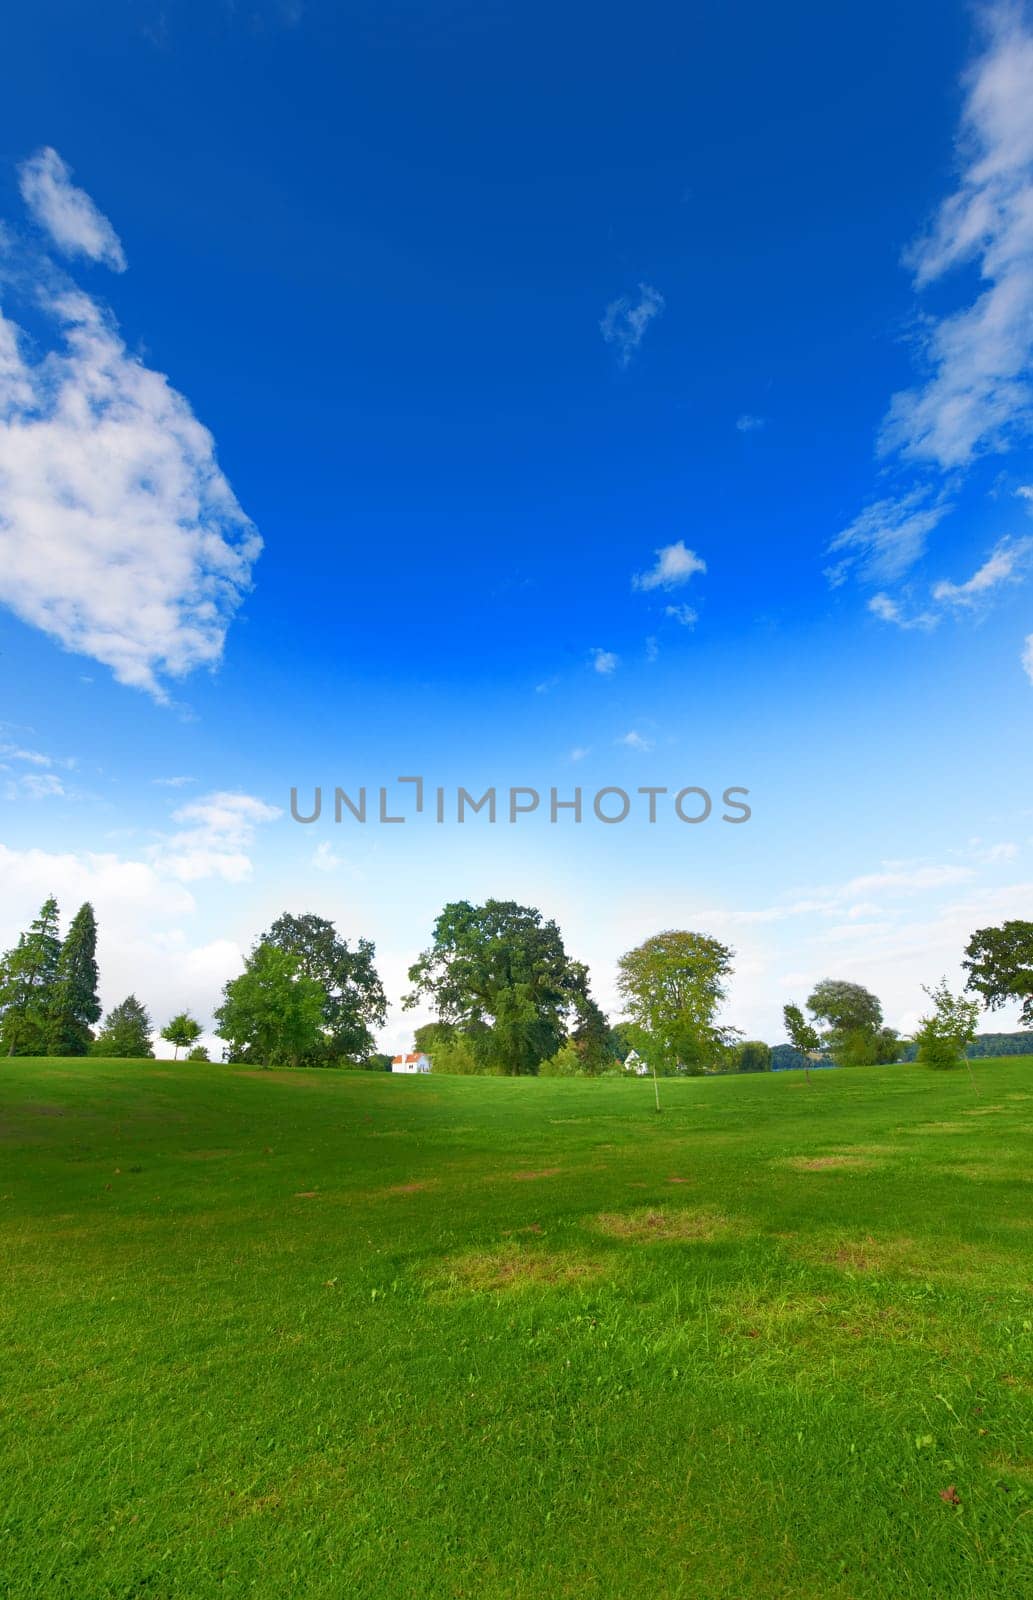 Landscape, field and nature in environment, trees and land with peace, blue sky and ecosystem in countryside. Sustainability, morning and grass for golf, scenery and outdoor, greenery and park by YuriArcurs